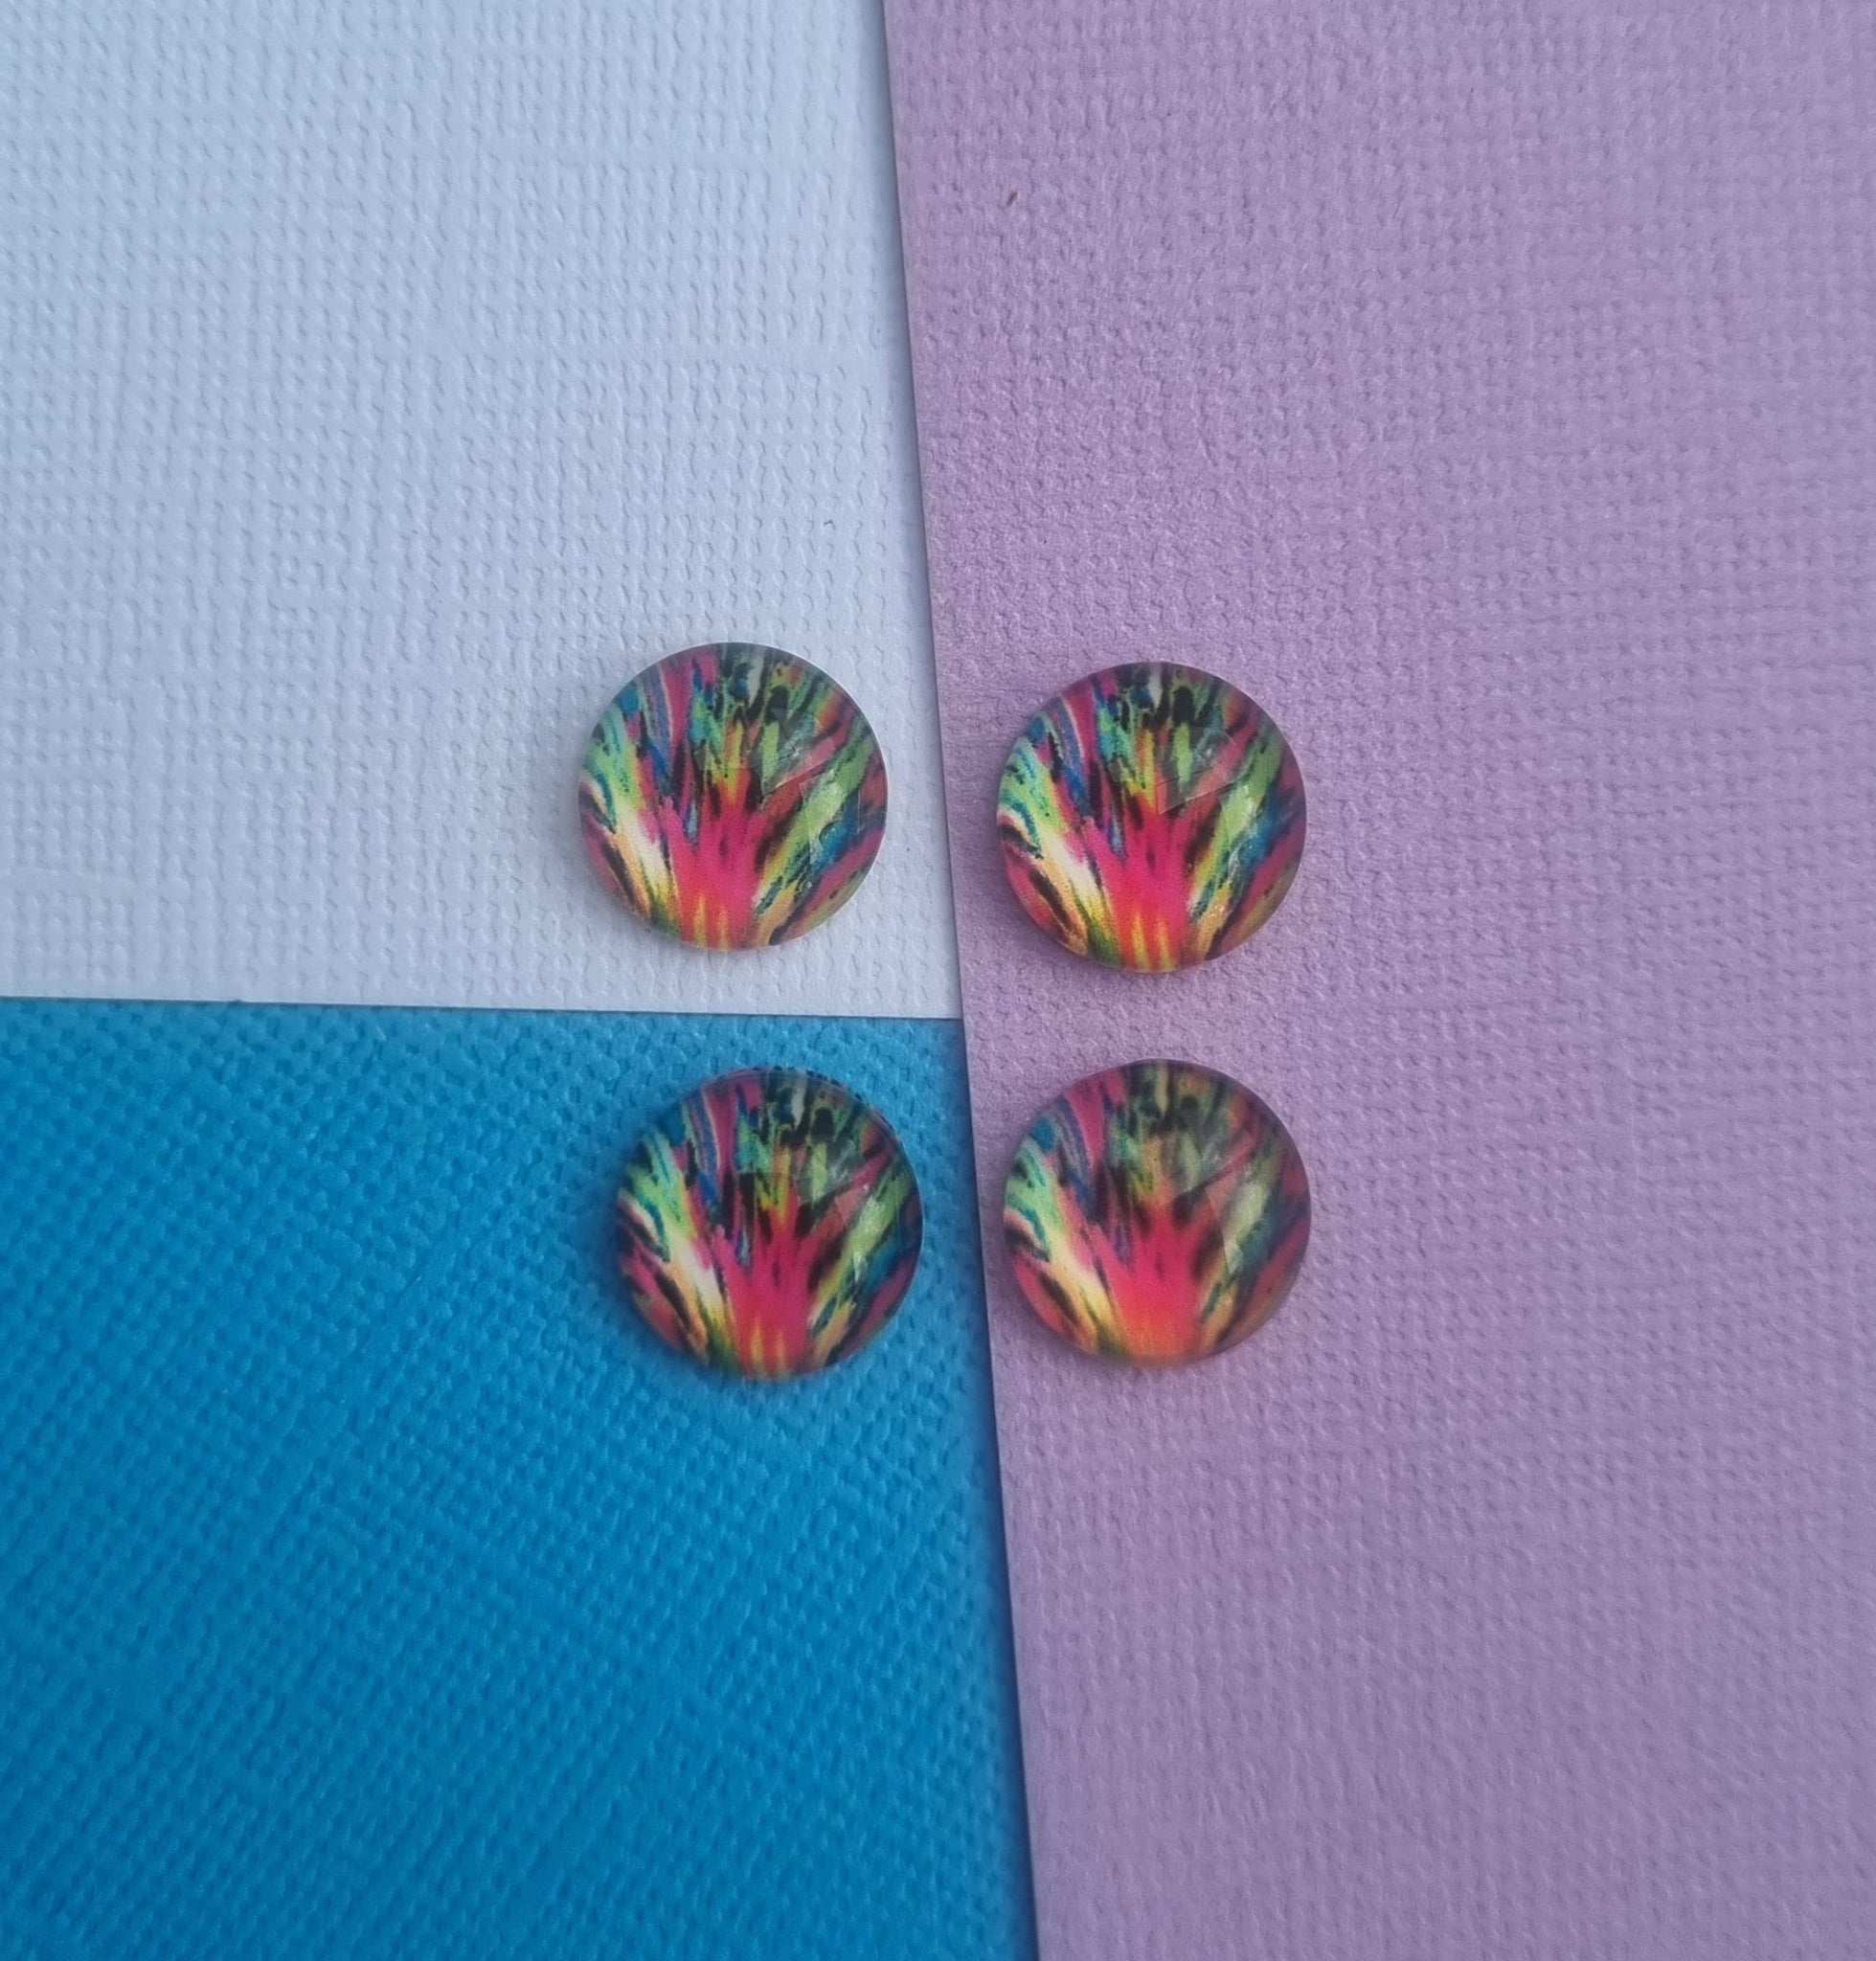 10pcs(5prs) 12mm abstract pattern cabochon, Glass Cabochons, Cabochons for jewellery, jewellery making, earring supplies, diy jewellery